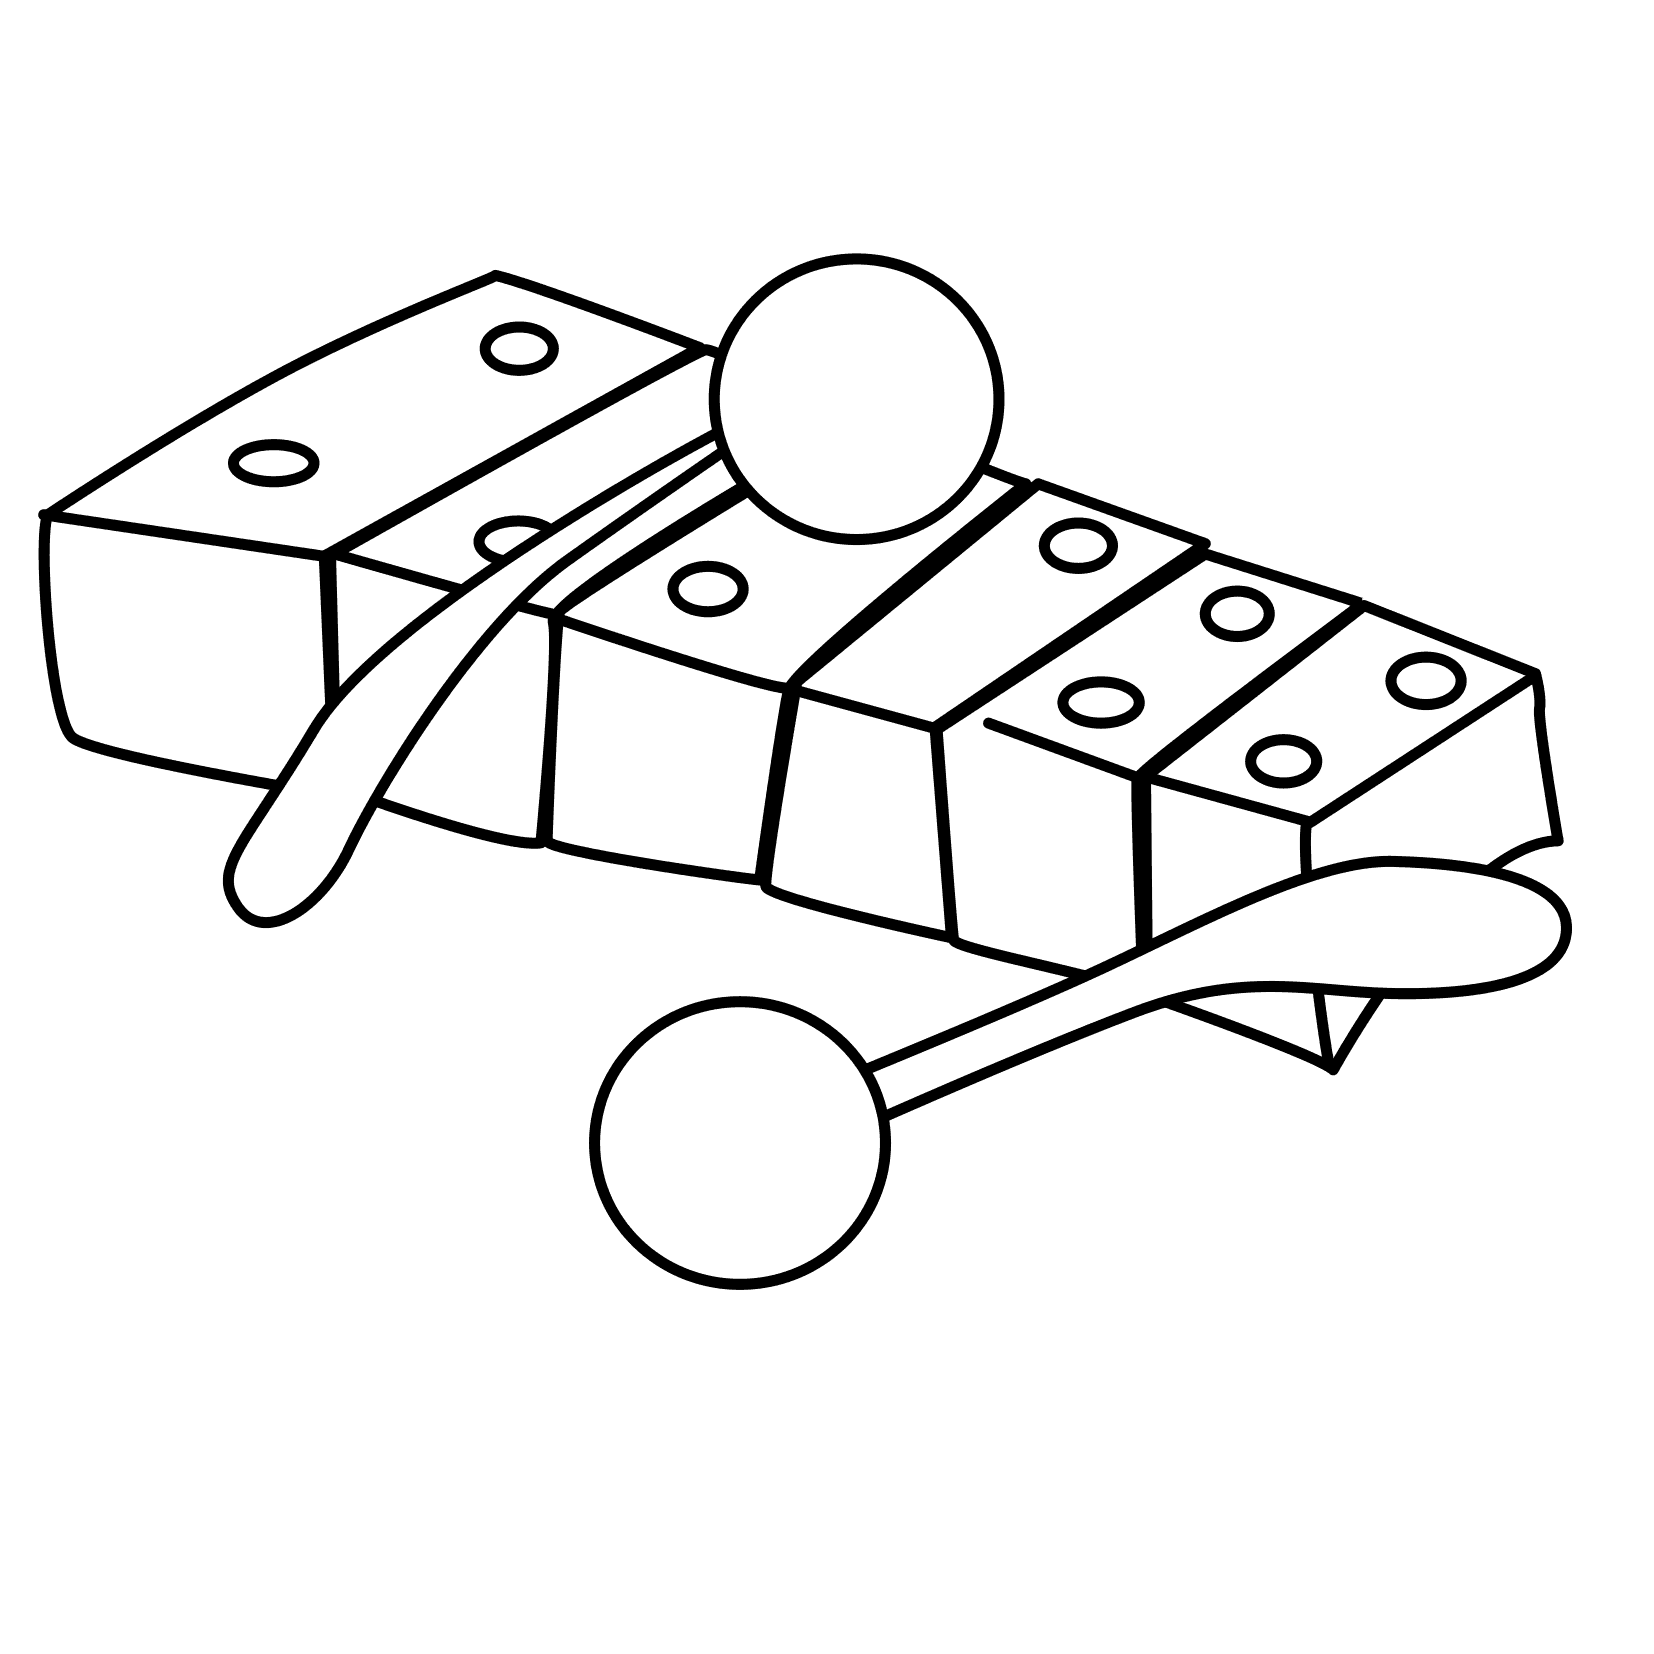 Download Xylophone Coloring Sheet Coloring Pages